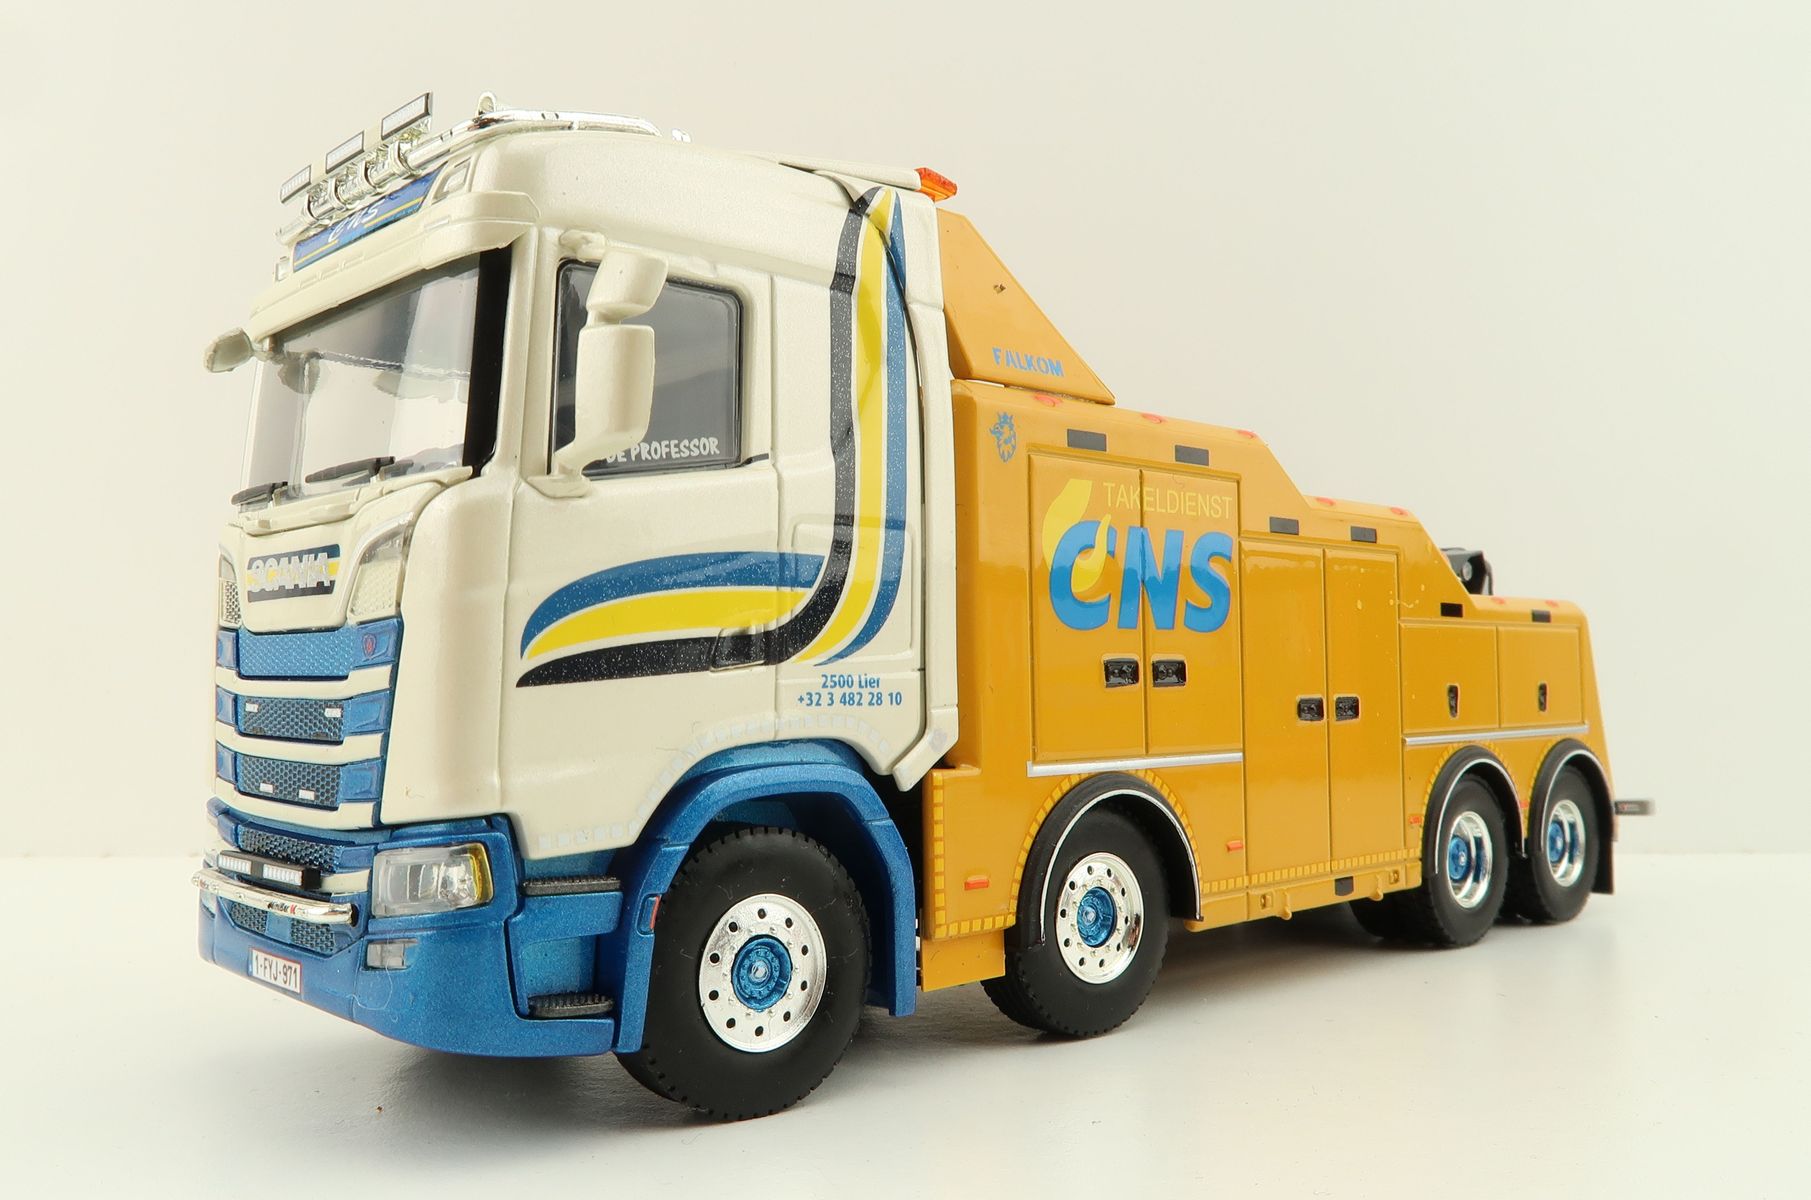 Product Image - WSI 01-3813 Scania S Normal CS20N 8X4 Falkom Wrecker Truck - CNS Takeldienst - Scale 1:50